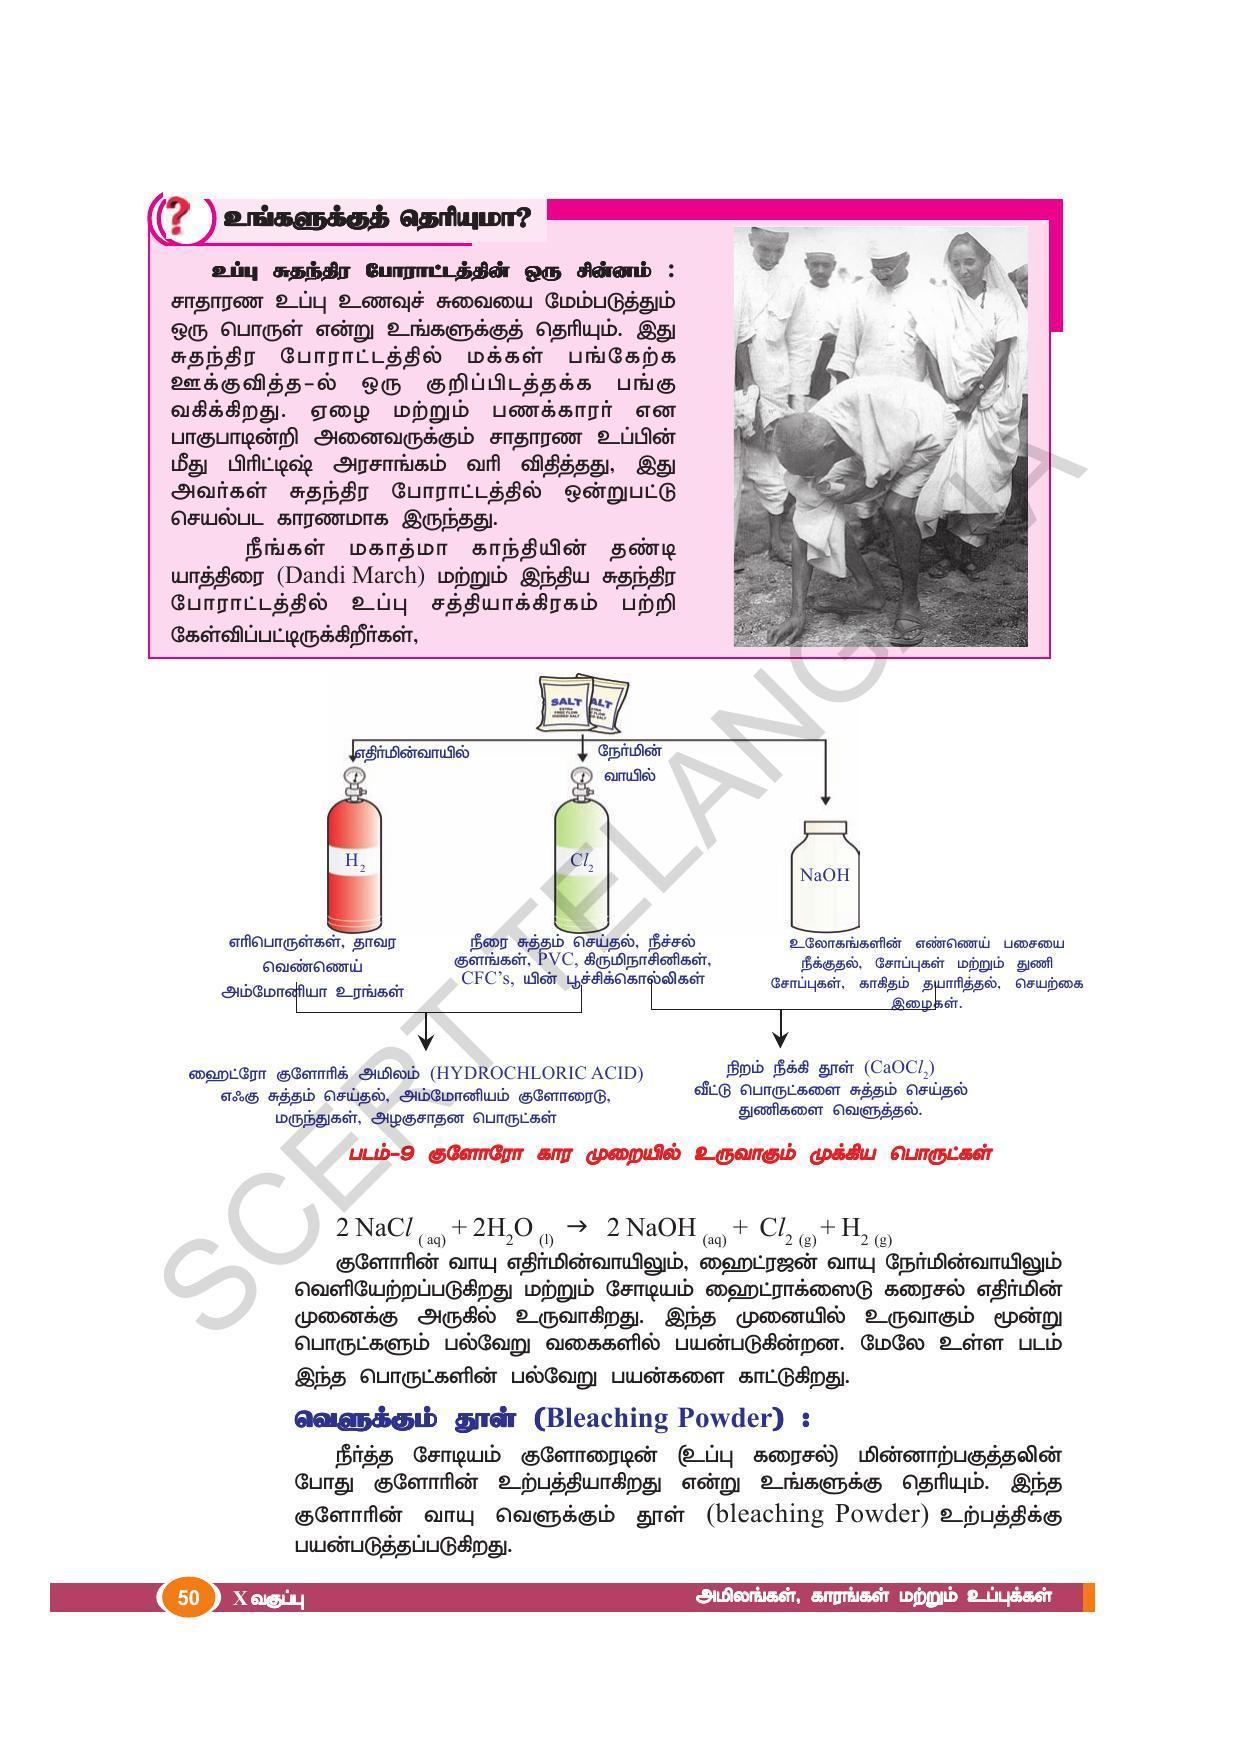 TS SCERT Class 10 Physical Science(Tamil Medium) Text Book - Page 62